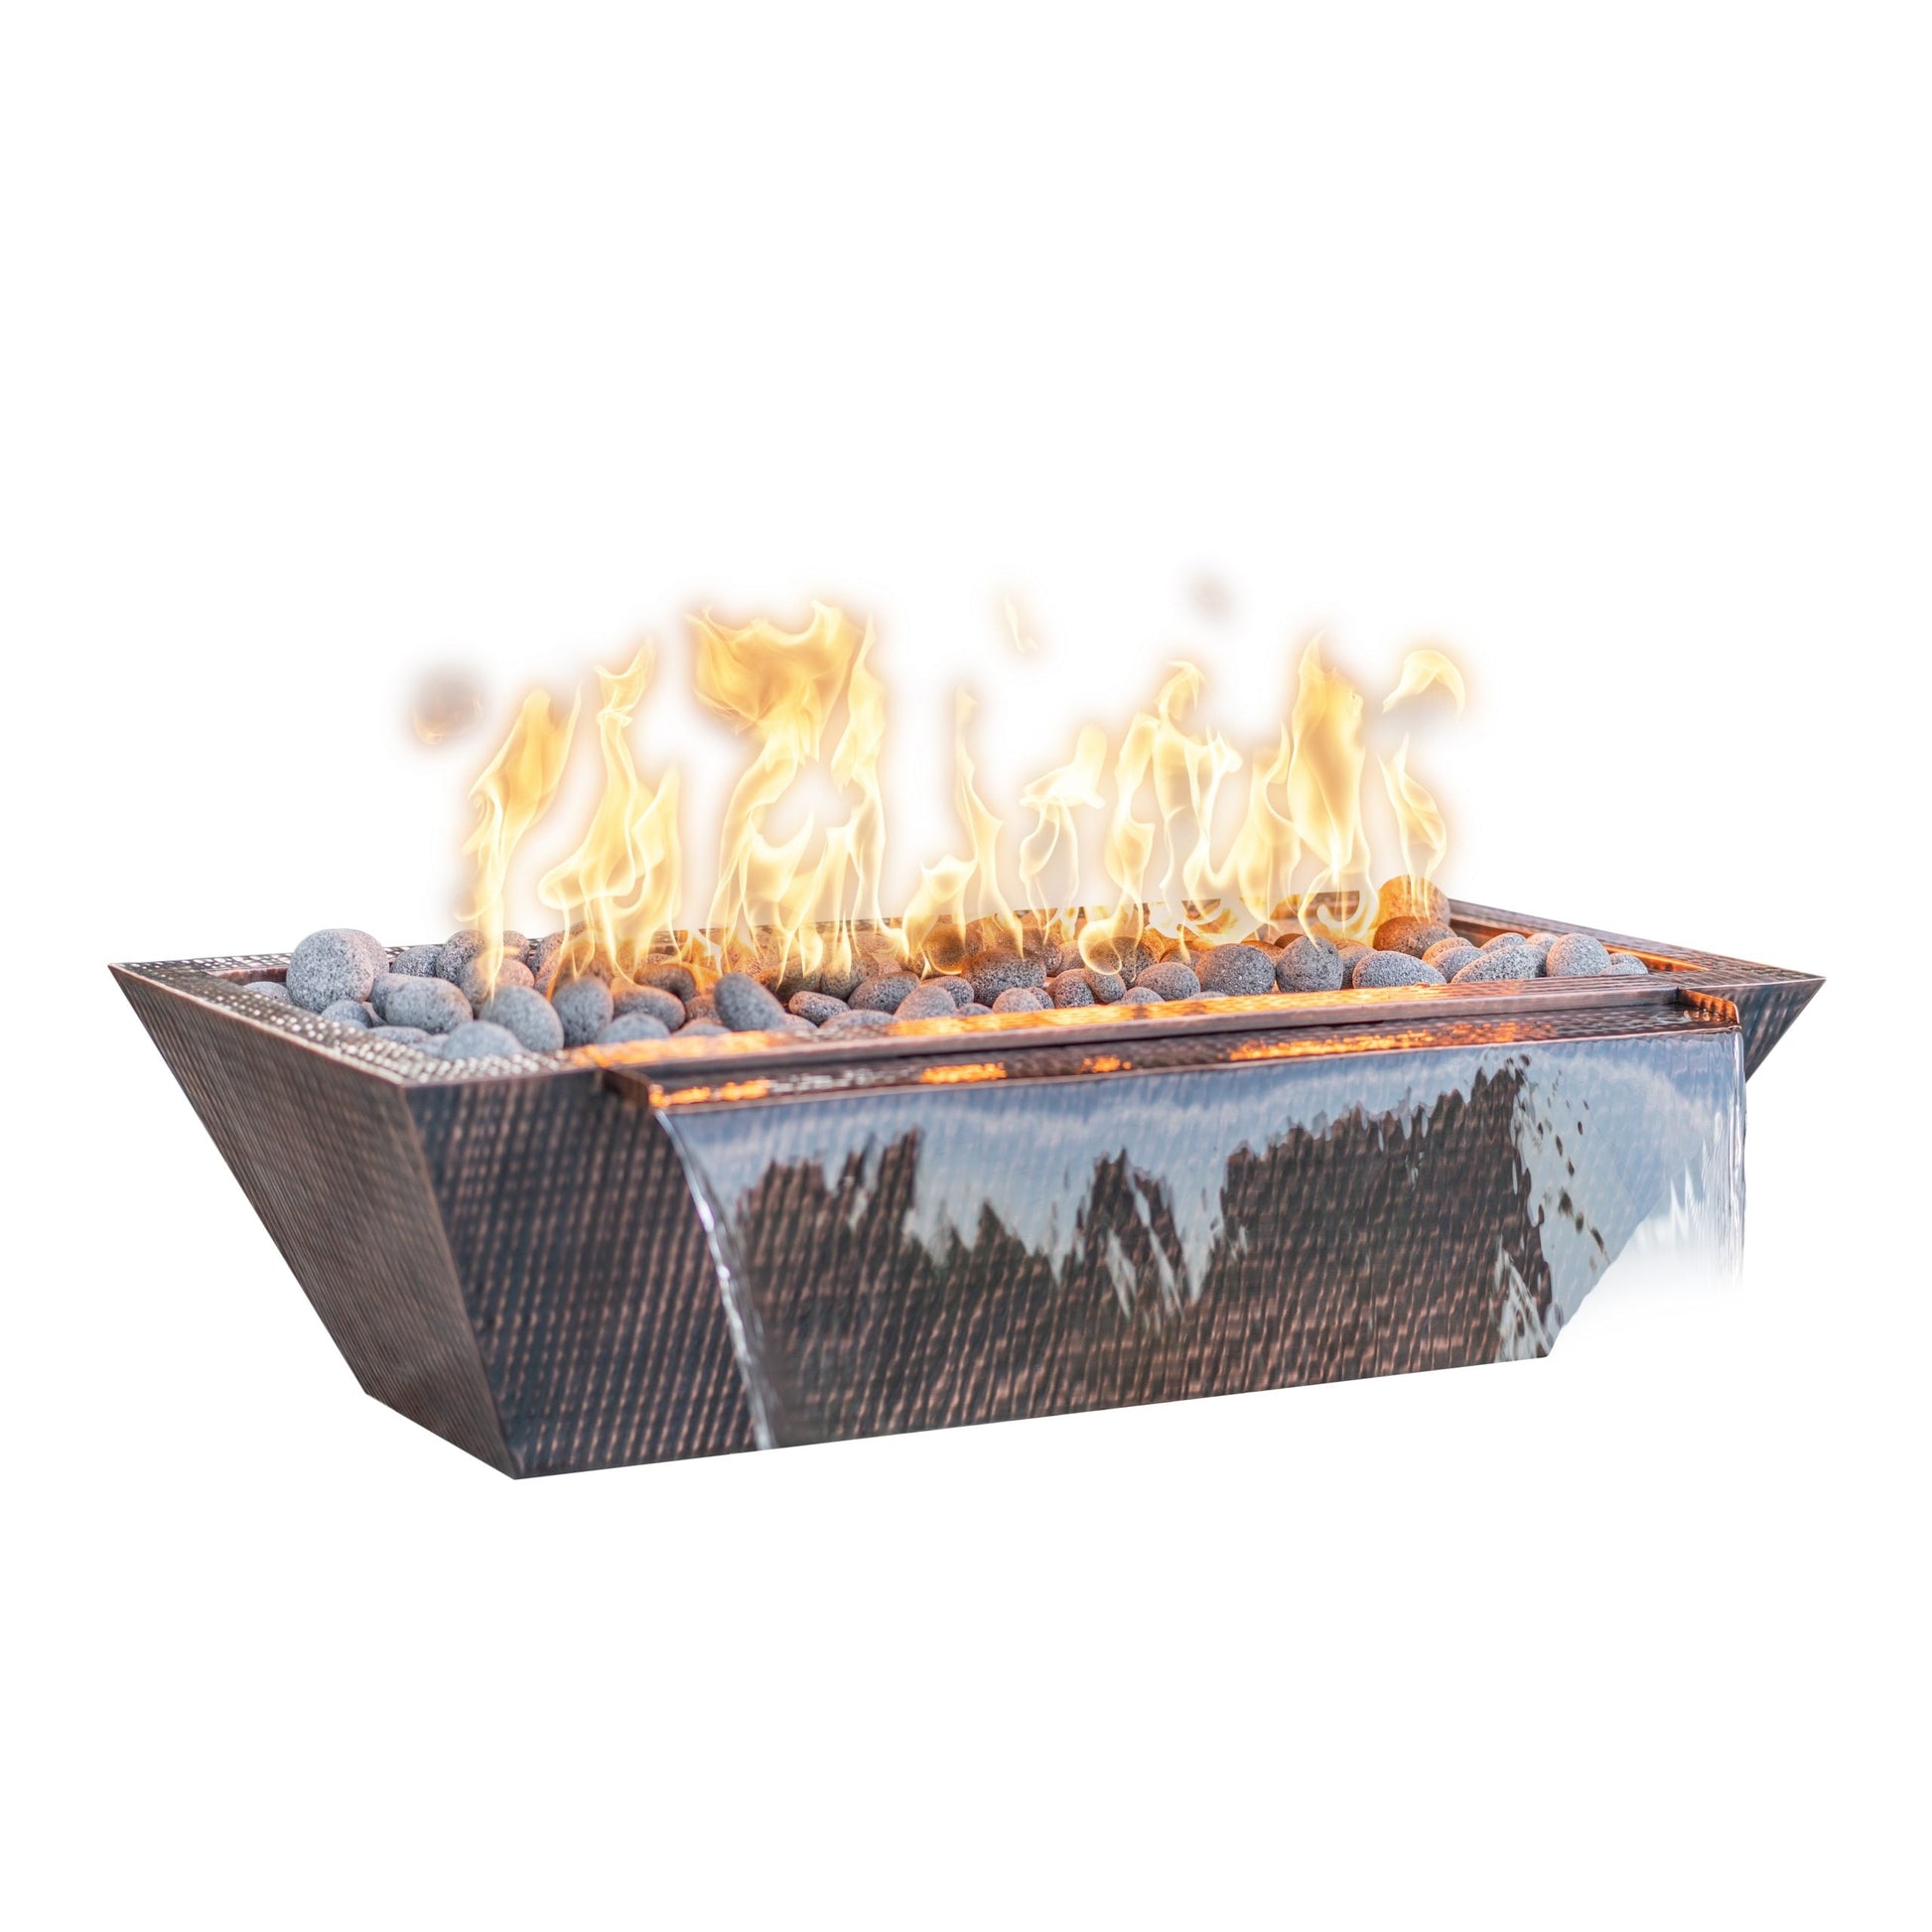 The Outdoor Plus Linear Maya 72" Stainless Steel Liquid Propane Fire & Water Bowl with 12V Electronic Ignition